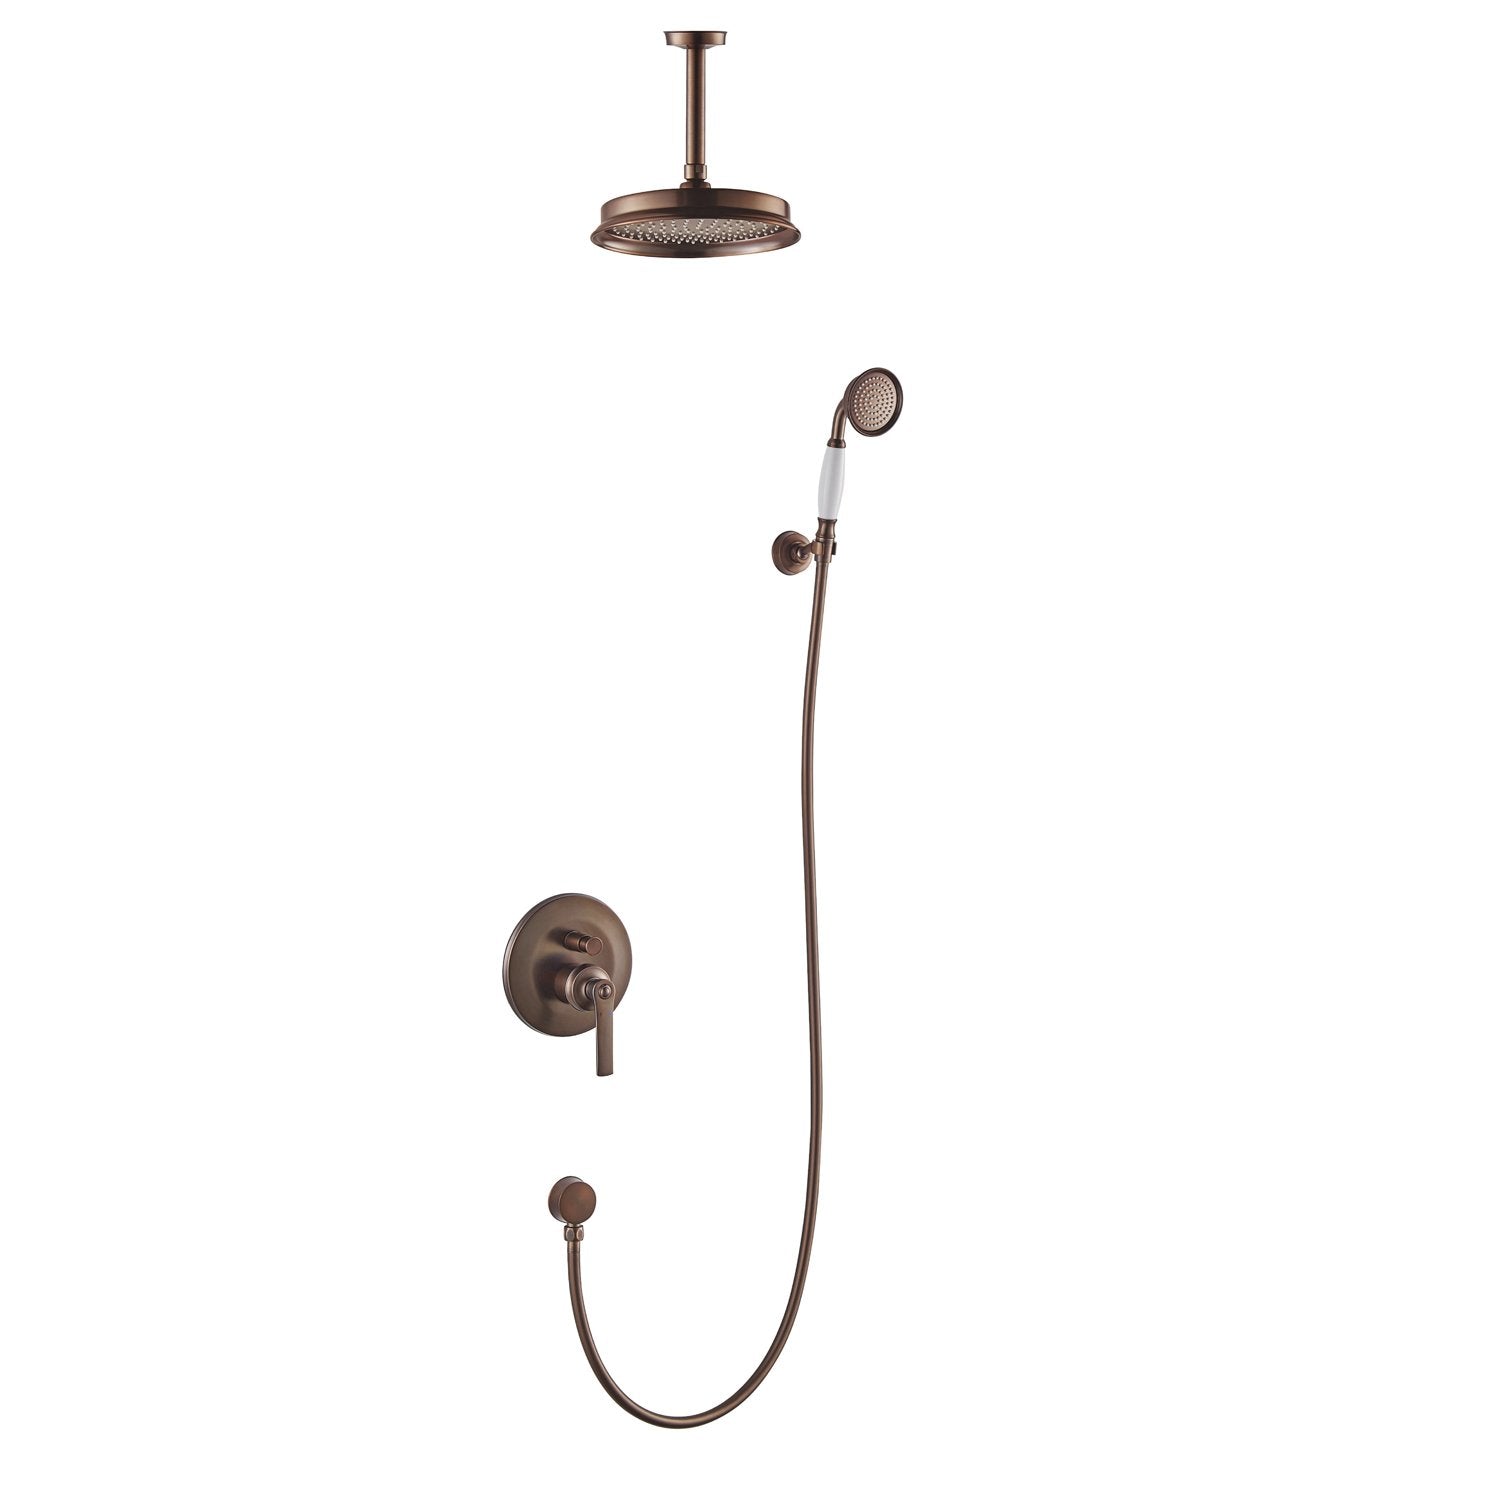 DAX Shower System, Round Rainfall Shower Head with Shower Trim Mixer and Hand Shower, Wall Mount, Brass Body, Oil Rubbed Bronze Finish with White Handle (DAX-8339-ORB)